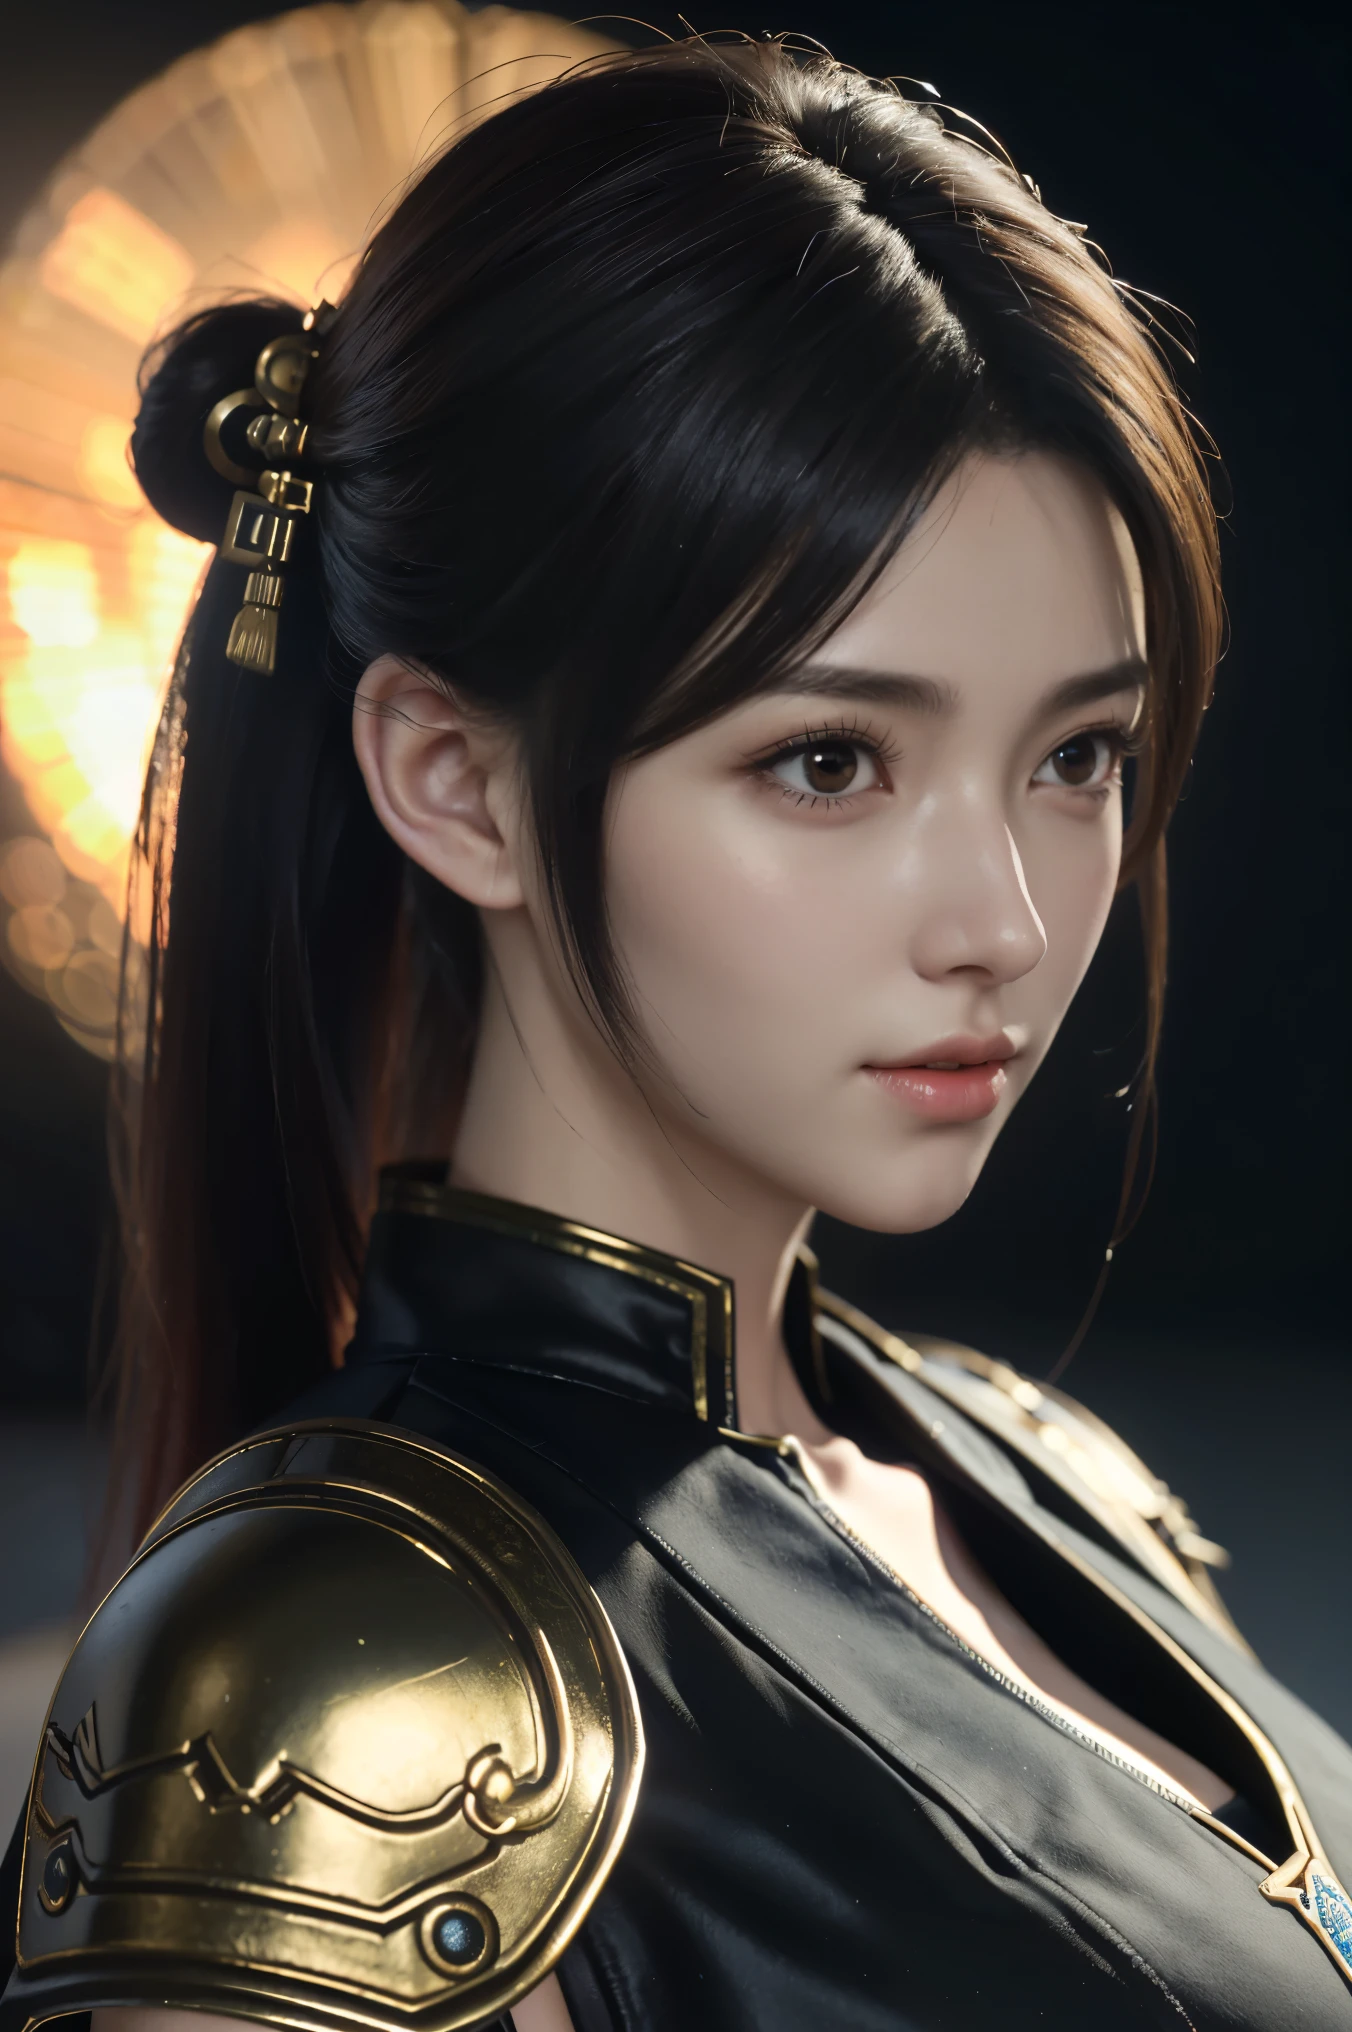 Game art，The best picture quality，Highest resolution，8K，((A bust photograph))，((Portrait))，((Head close-up))，(Rule of thirds)，Unreal Engine 5 rendering works， (The Girl of the Future)，(Female Warrior)， 22-year-old girl，(Female hackers)，(Rainbow hair，Ancient Oriental hairstyle)，((The pupils of the red eyes:1.3))，(A beautiful eye full of detail)，(Big breasts)，(Eye shadow)，Elegant and charming，indifferent，((Anger))，(General armor in ancient Chinese style，Joint Armor，There are exquisite Chinese patterns on the clothes，A flash of jewellery)，figure，Fantasy style， Photo poses，City background，Movie lights，Ray tracing，Game CG，((3D Unreal Engine))，oc rendering reflection pattern